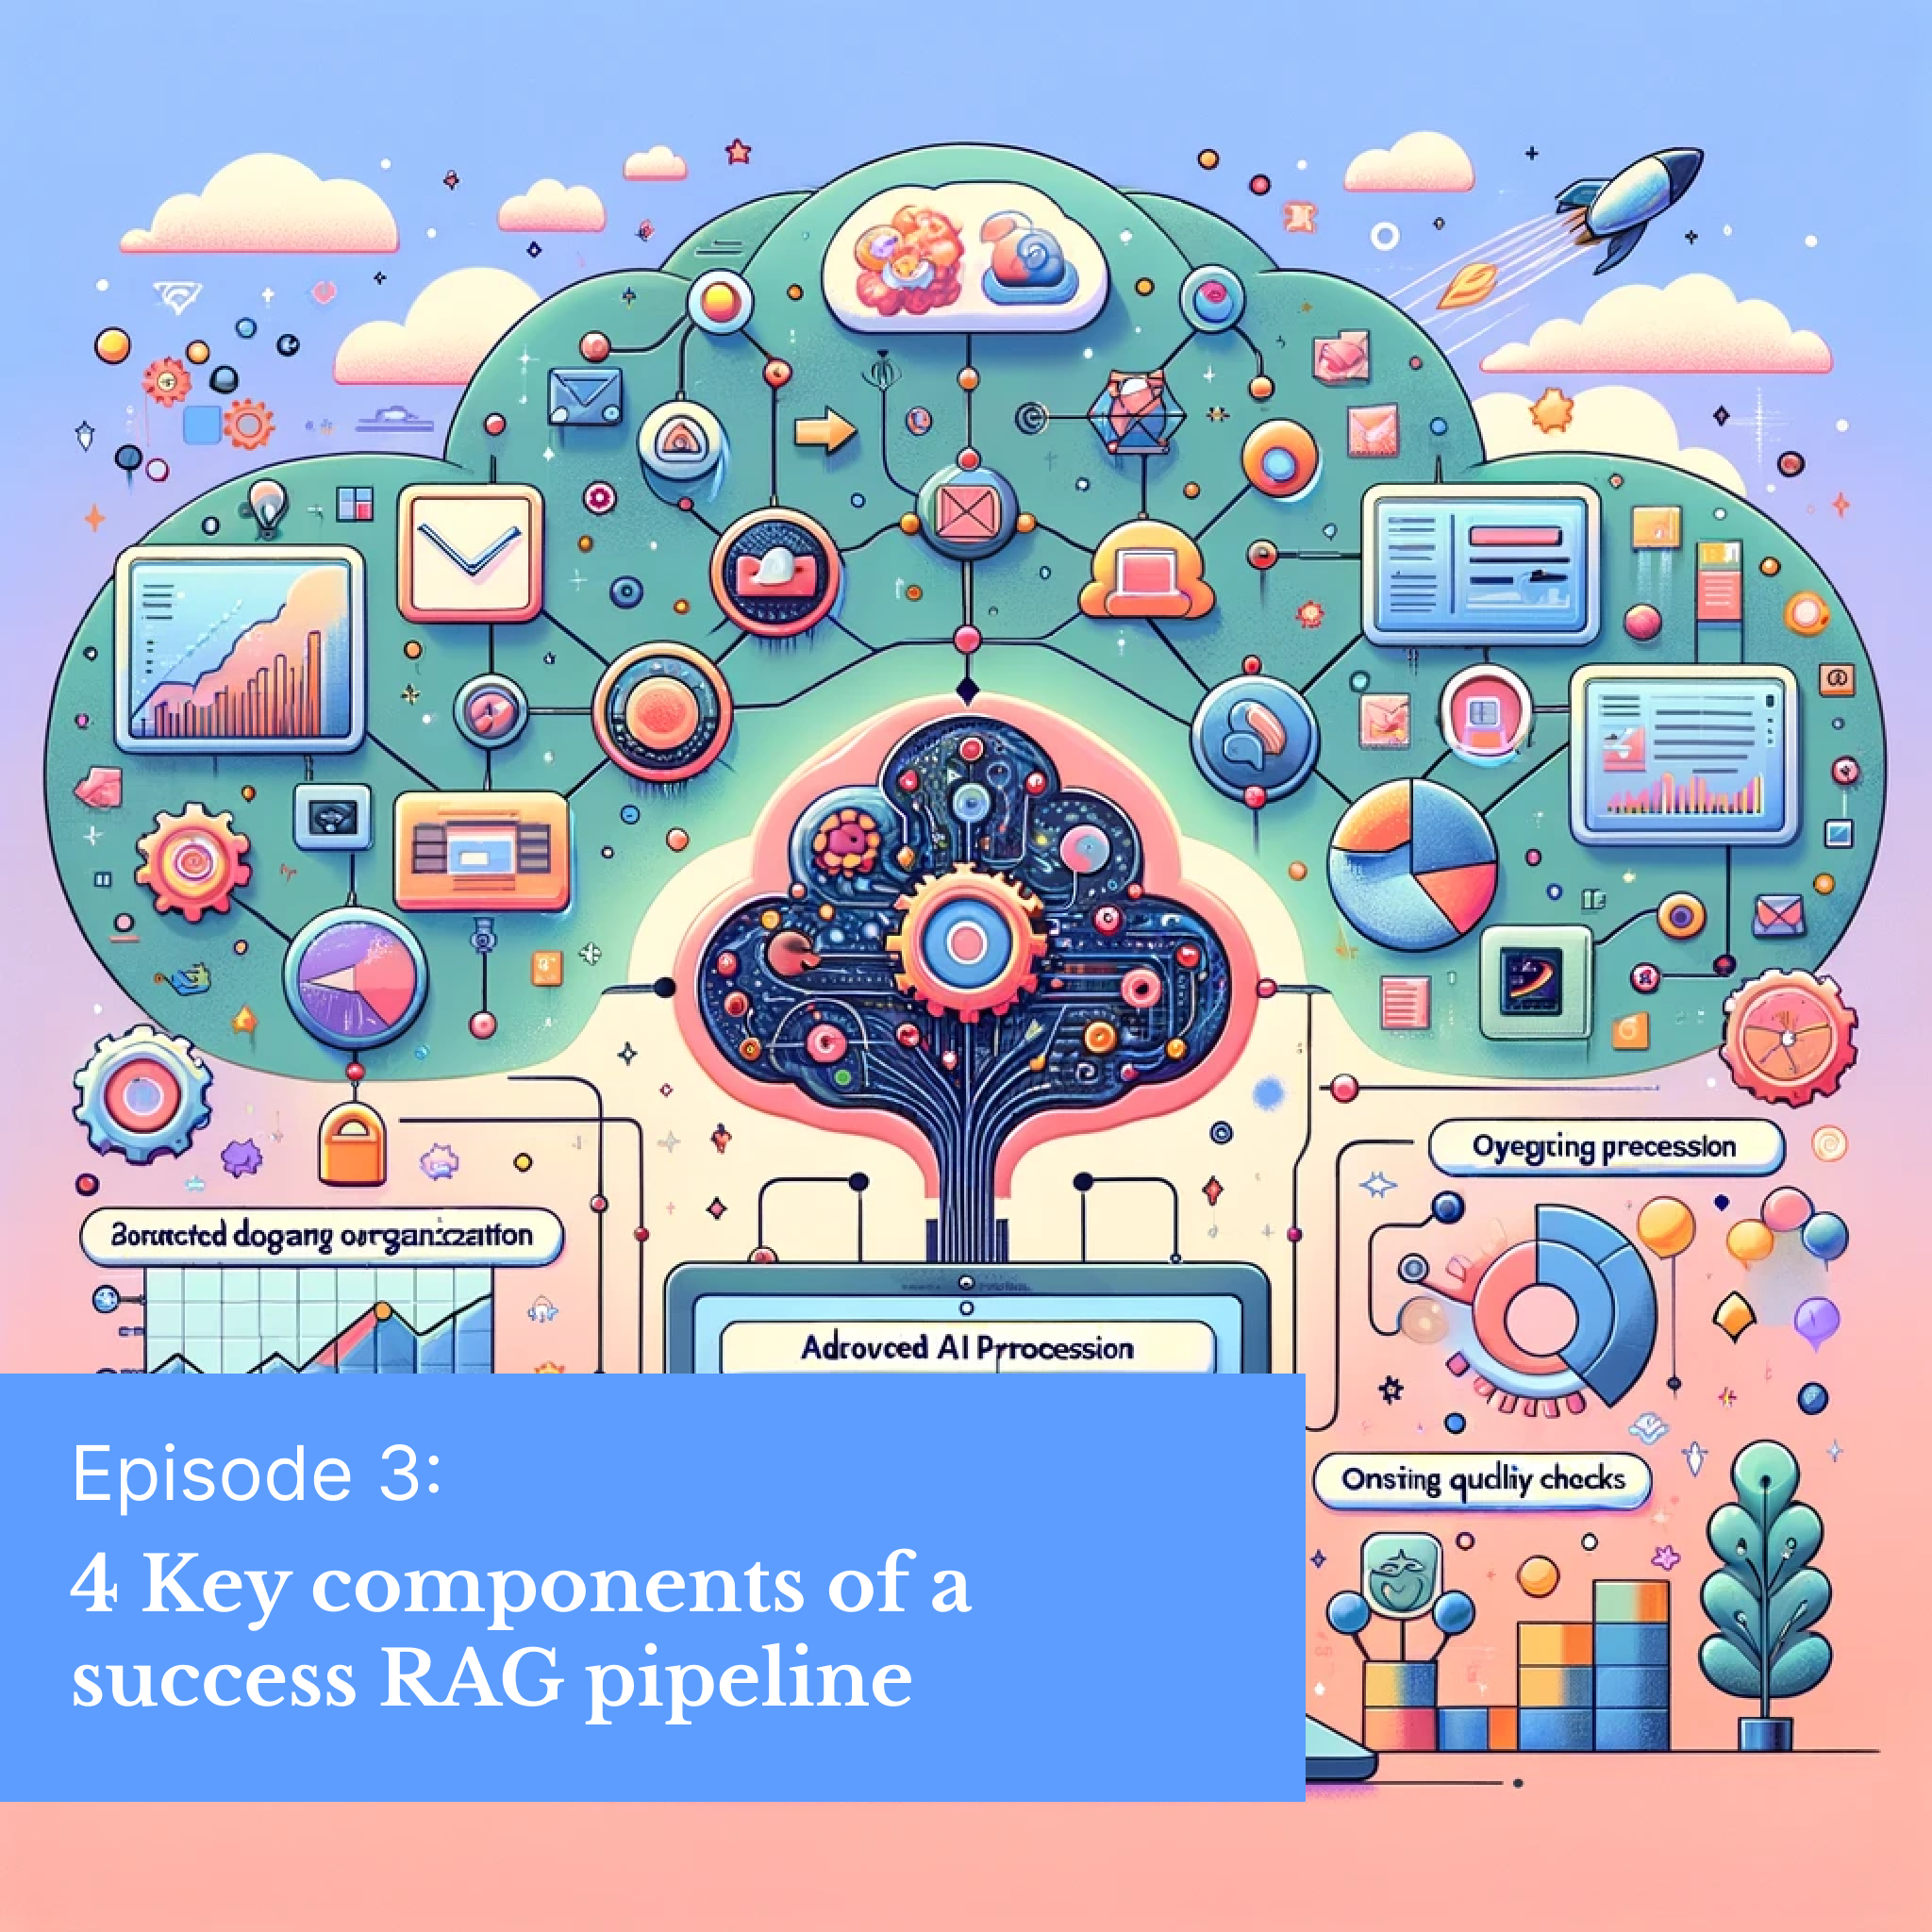 4 Key components of a success RAG pipeline for your GenAI application